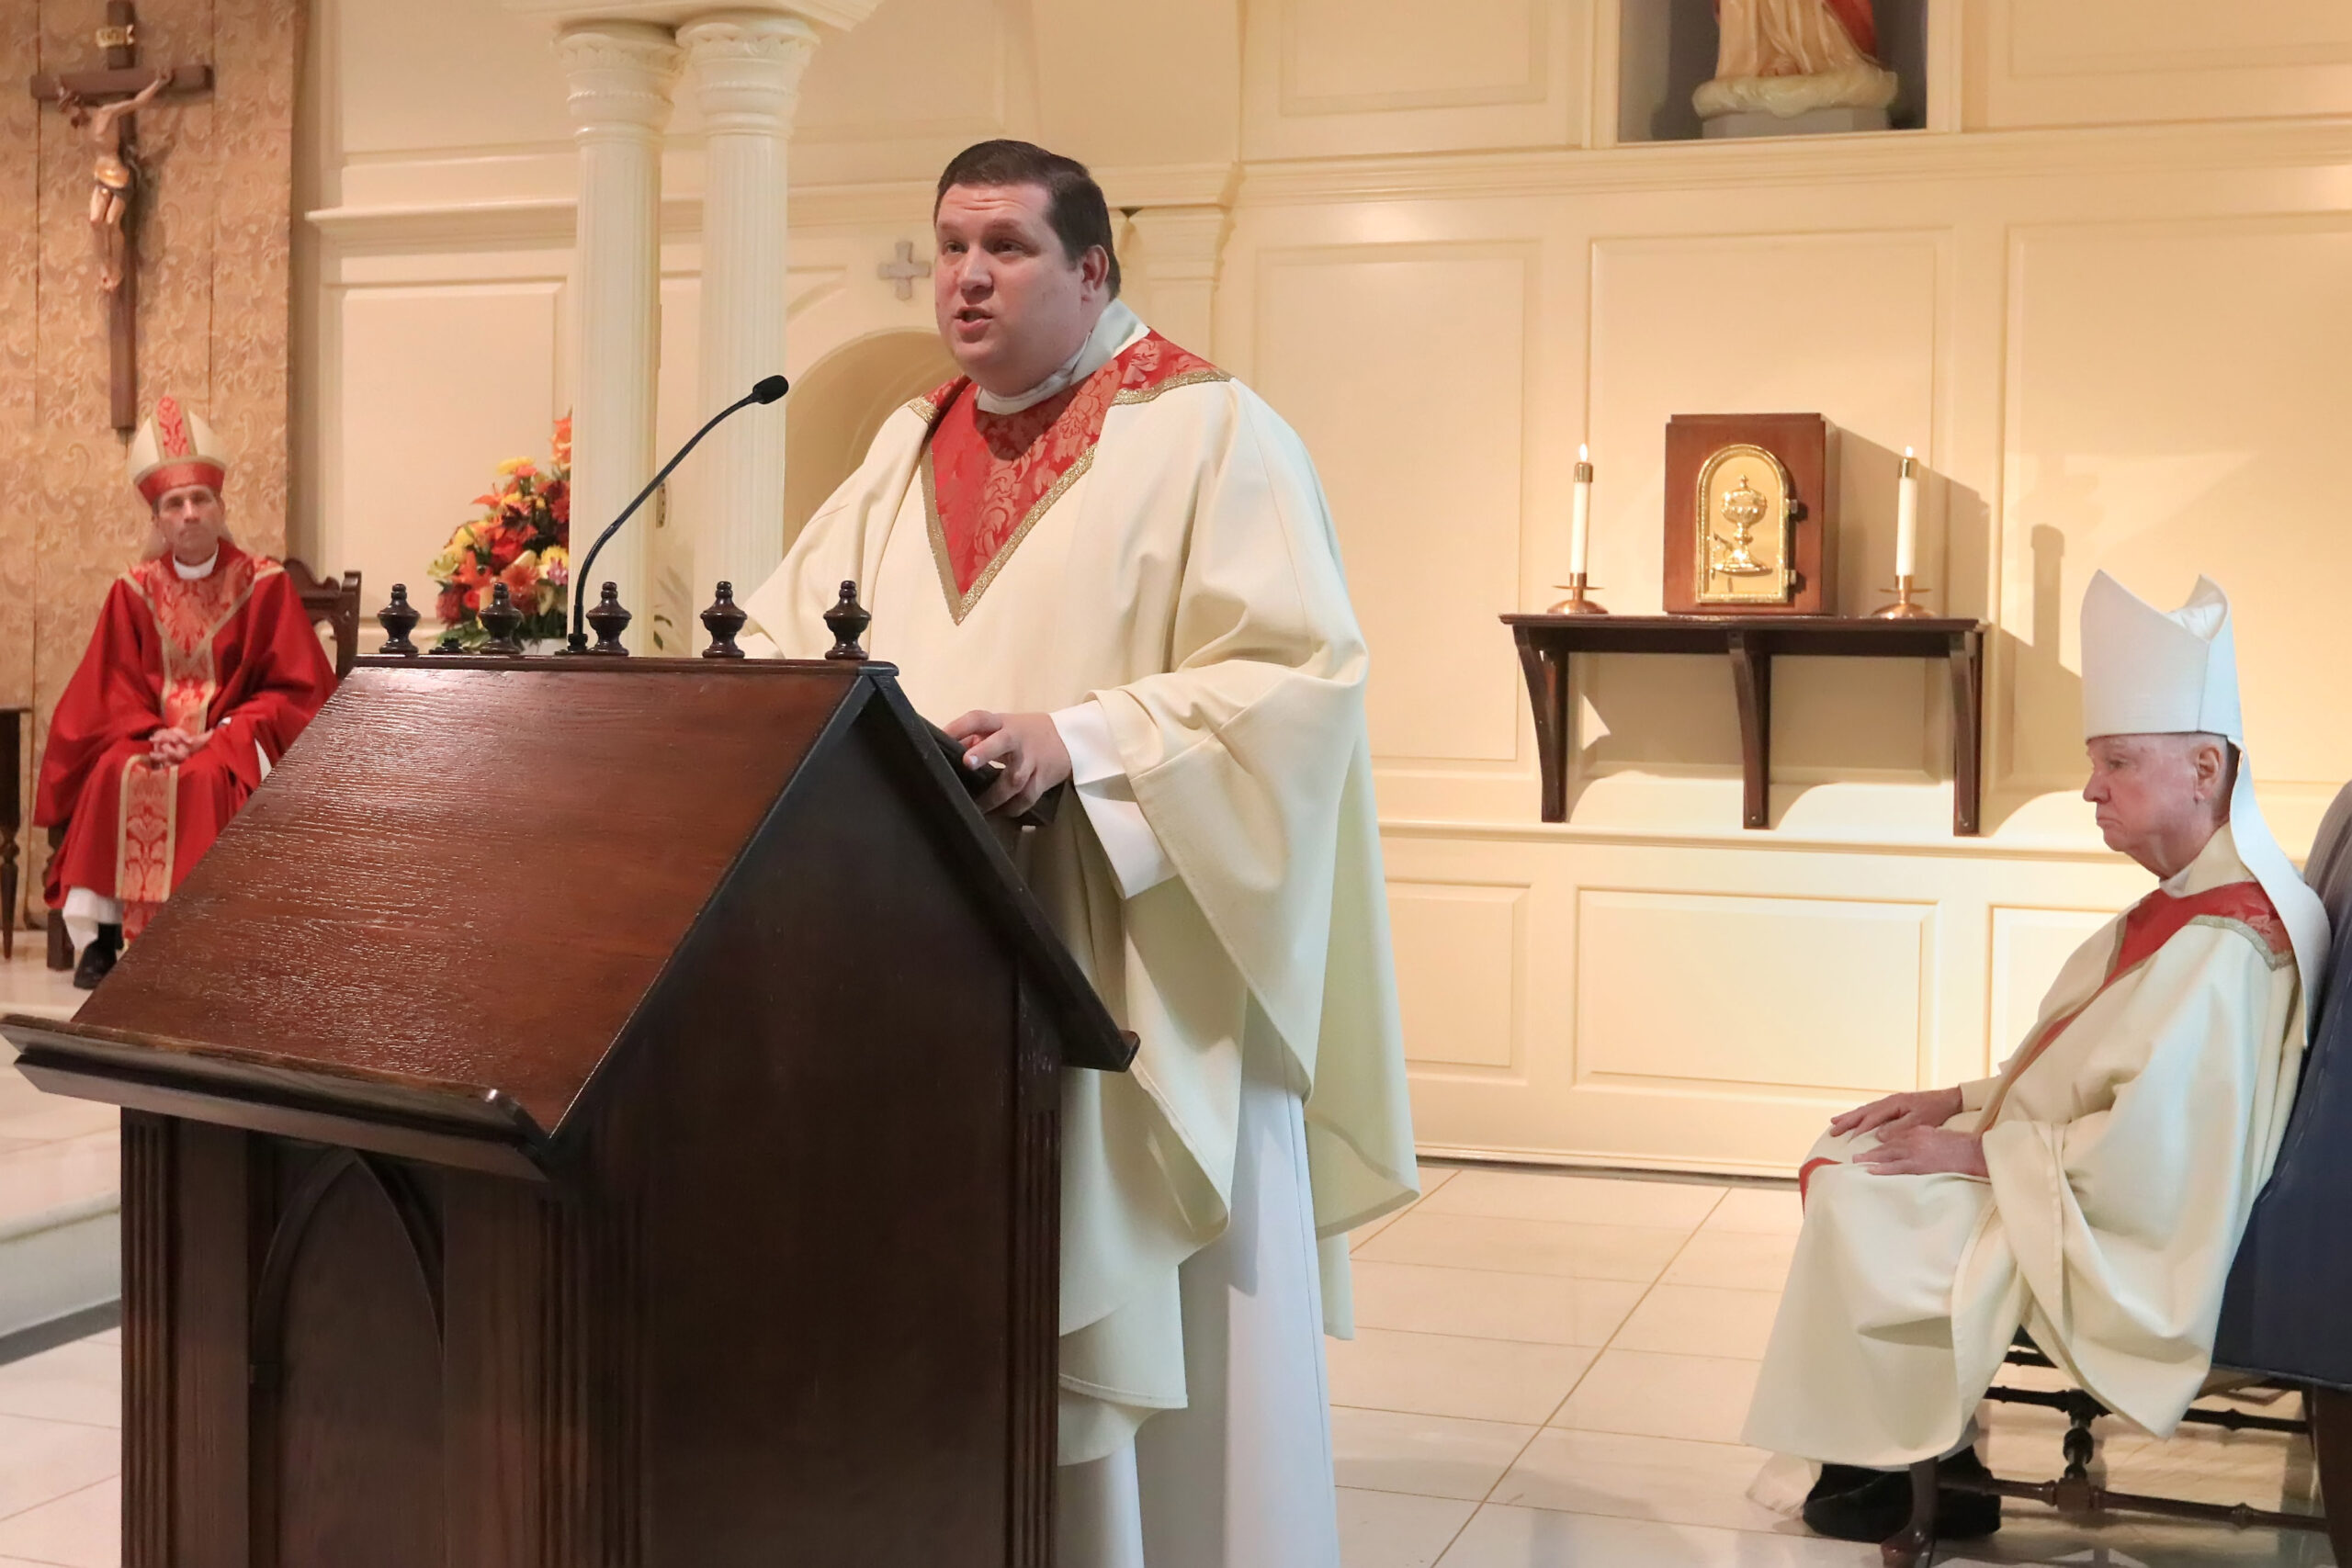 Red Mass homily from Father Joseph W. McQuaide IV: 'We await the descent of the Holy Spirit'